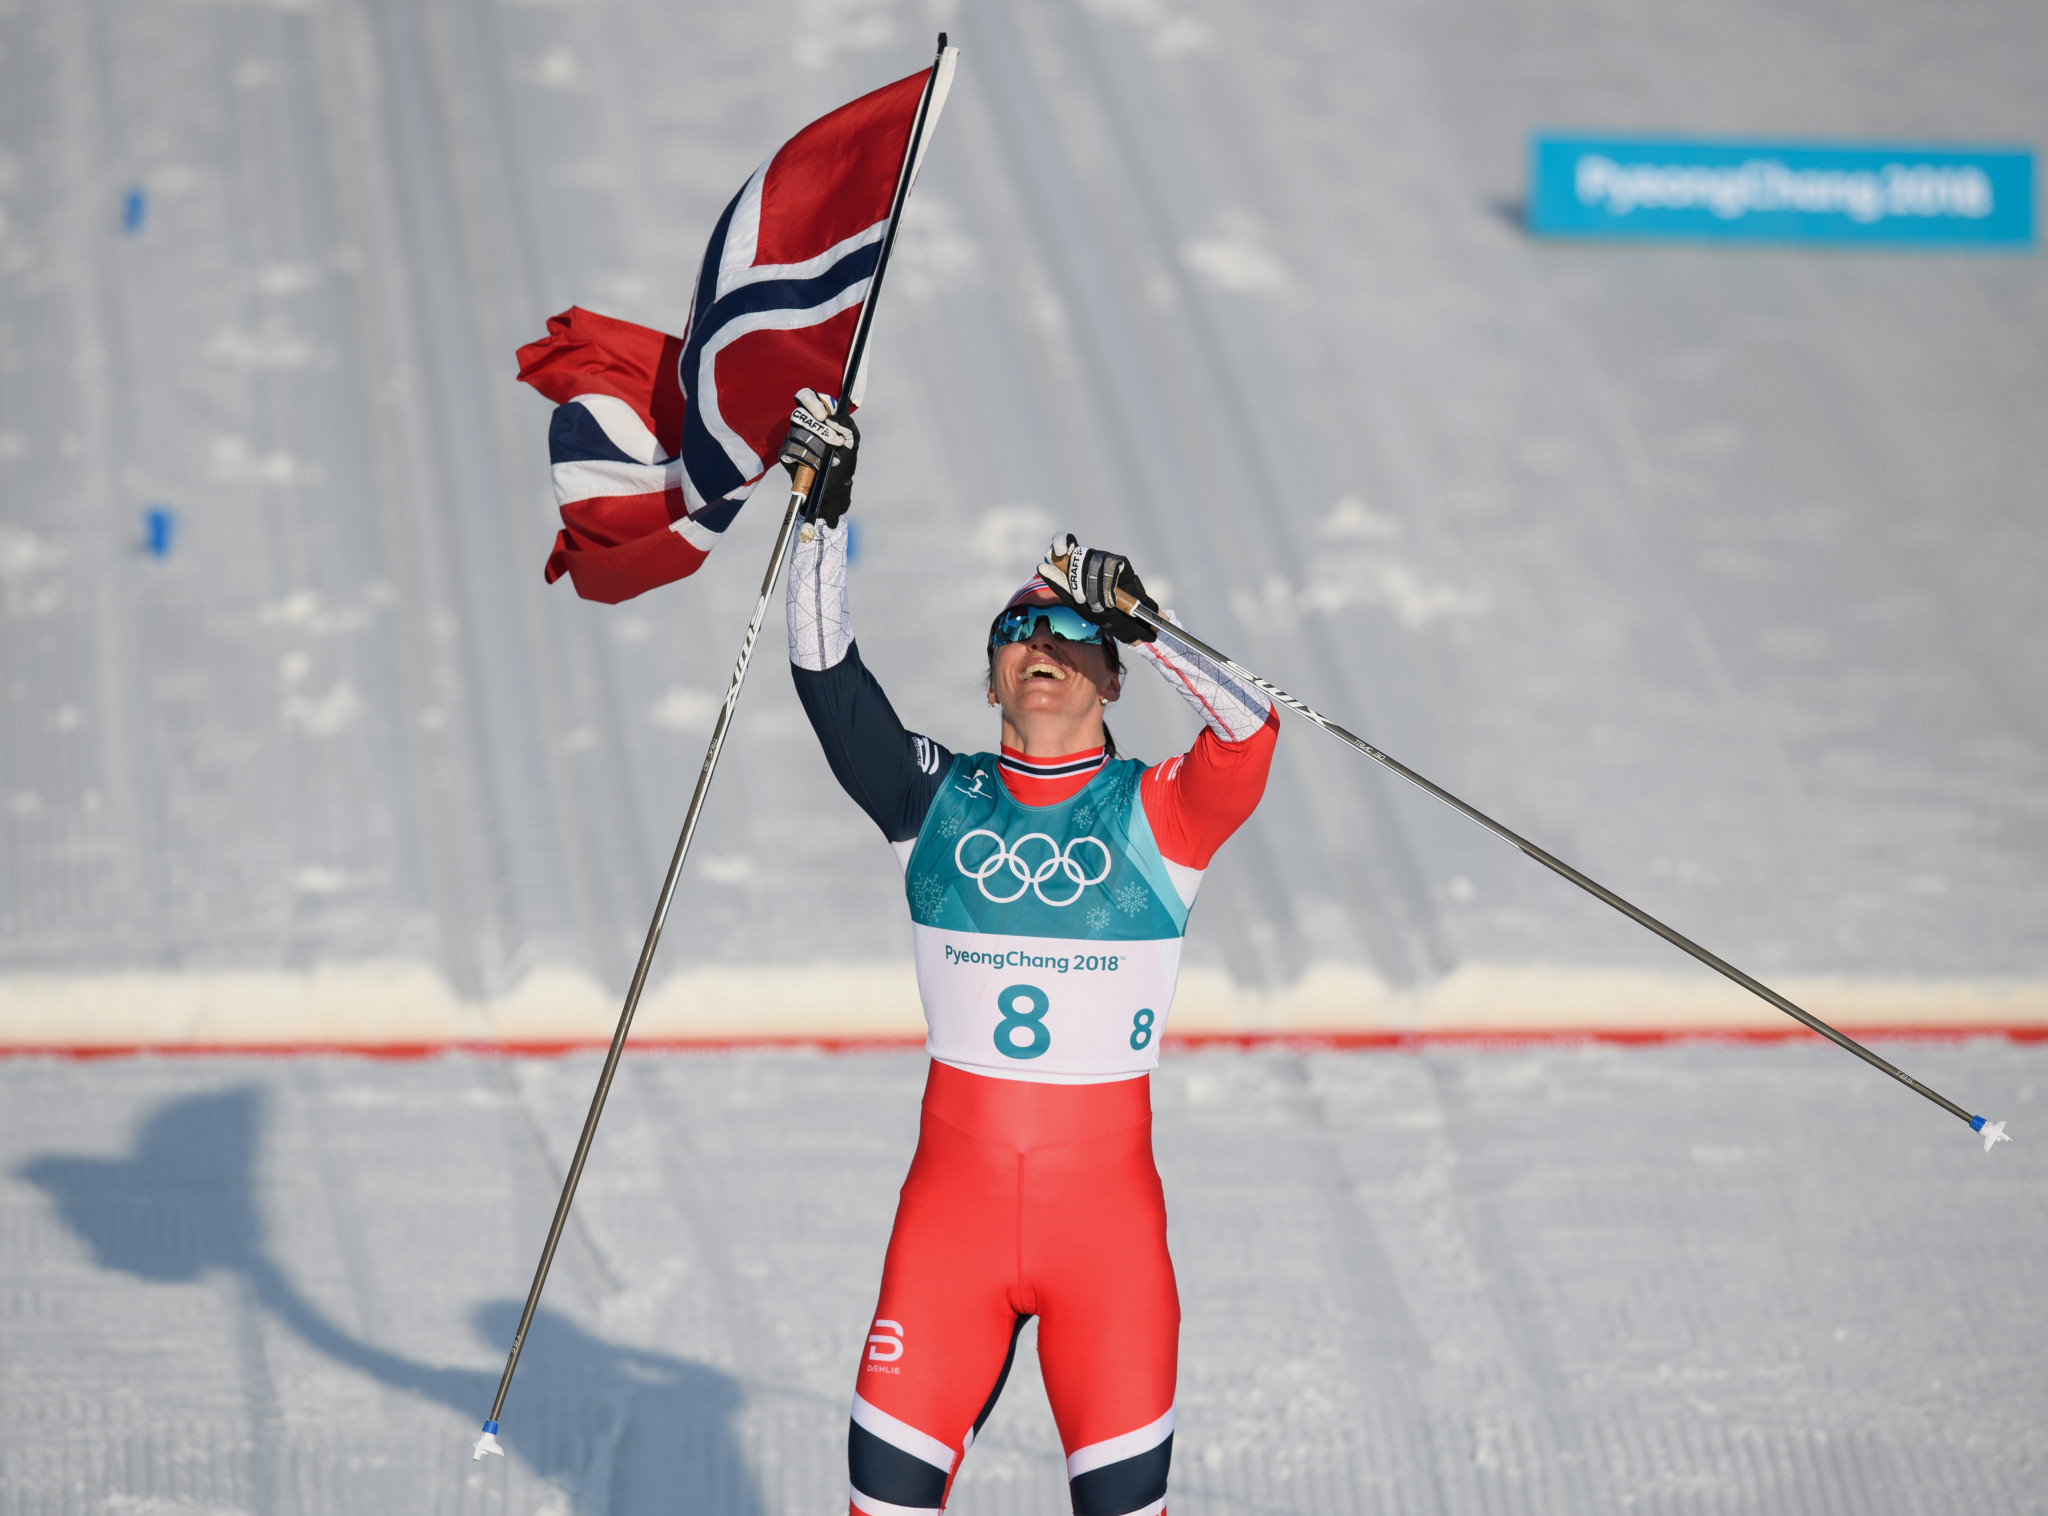 The EOC President reserved praise for Norway, after they topped the Pyeongchang 2018 medals table ©Getty Images